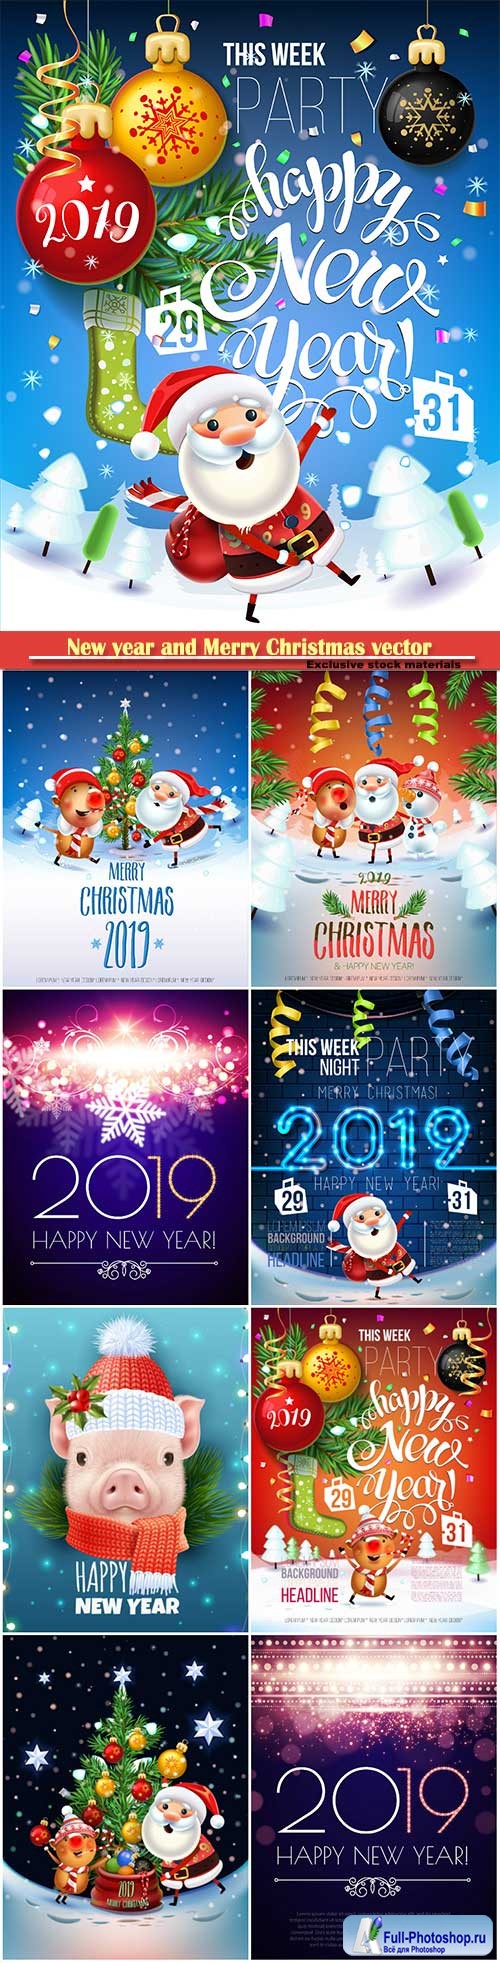 2019 New year and Merry Christmas poster card, Santa Claus, pig decorate the Christmas tree